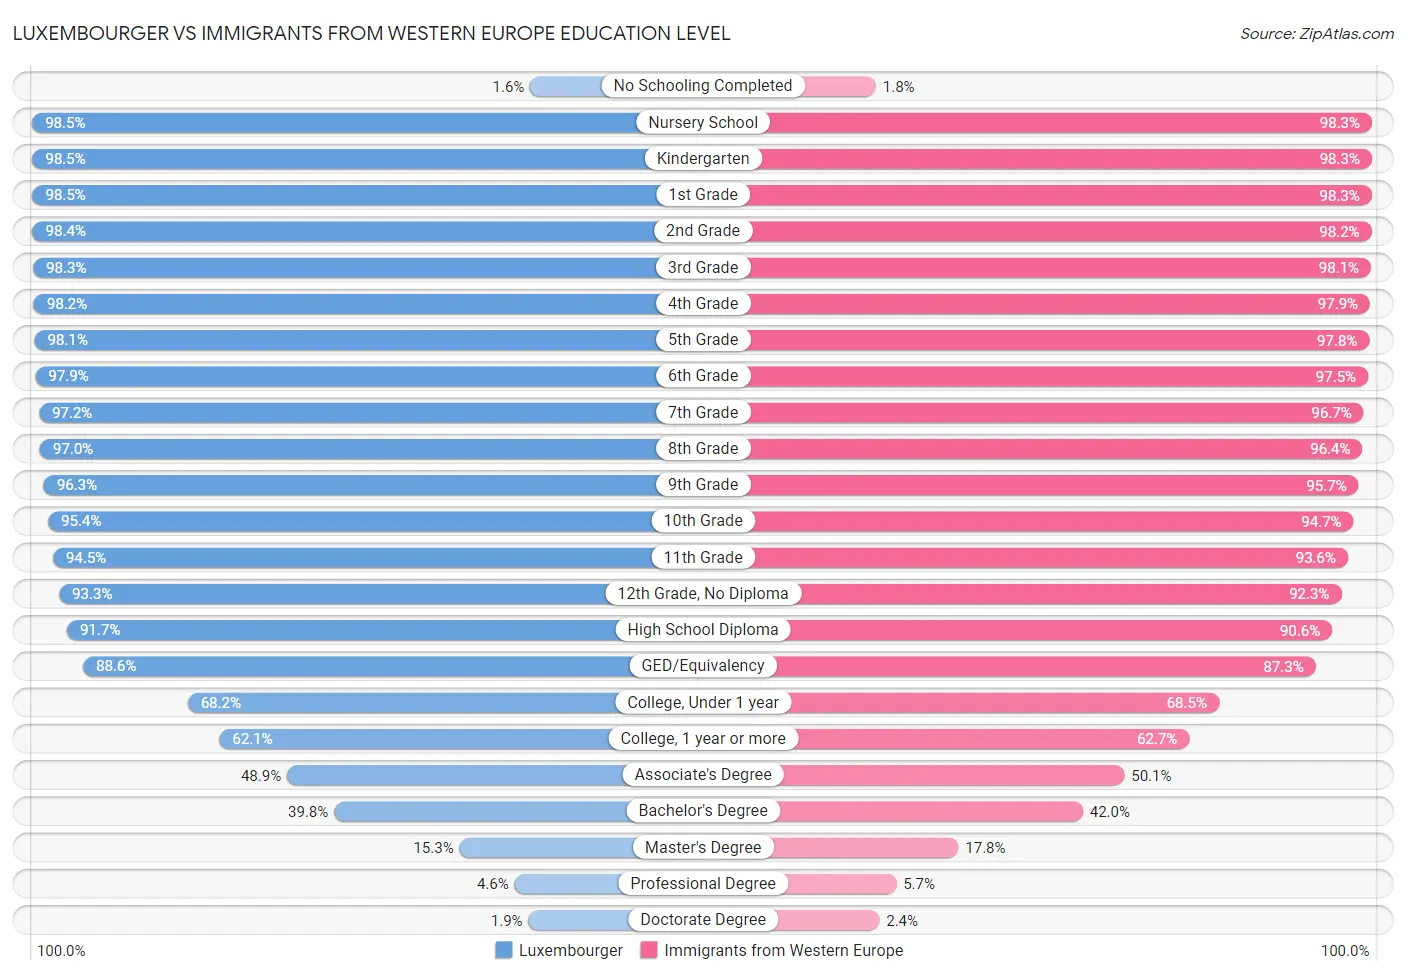 Luxembourger vs Immigrants from Western Europe Education Level